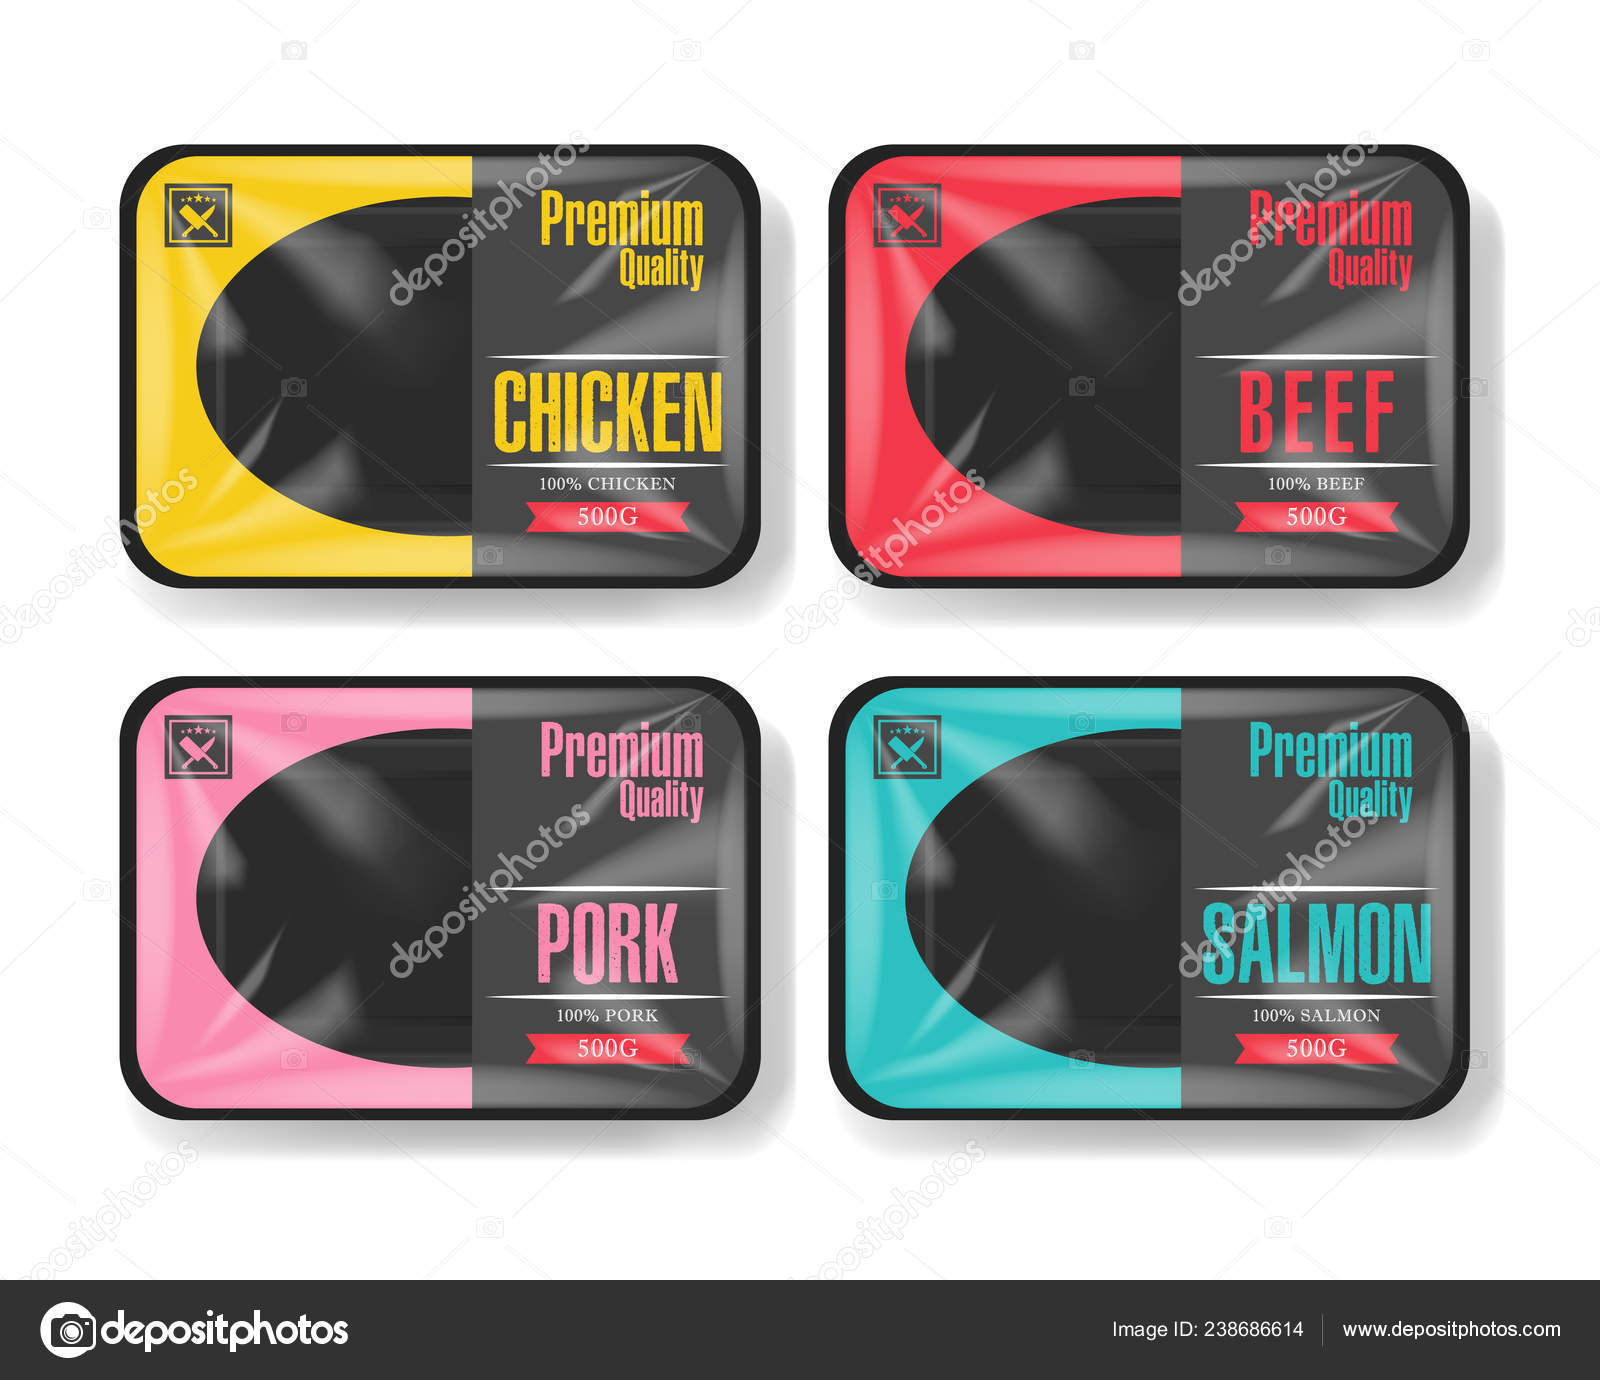 Download Plastic Tray Container With Cellophane Cover Mockup Template For Your Design Plastic Food Container With Label Template Vector Illustration Vector Image By C Vandycandy Vector Stock 238686614